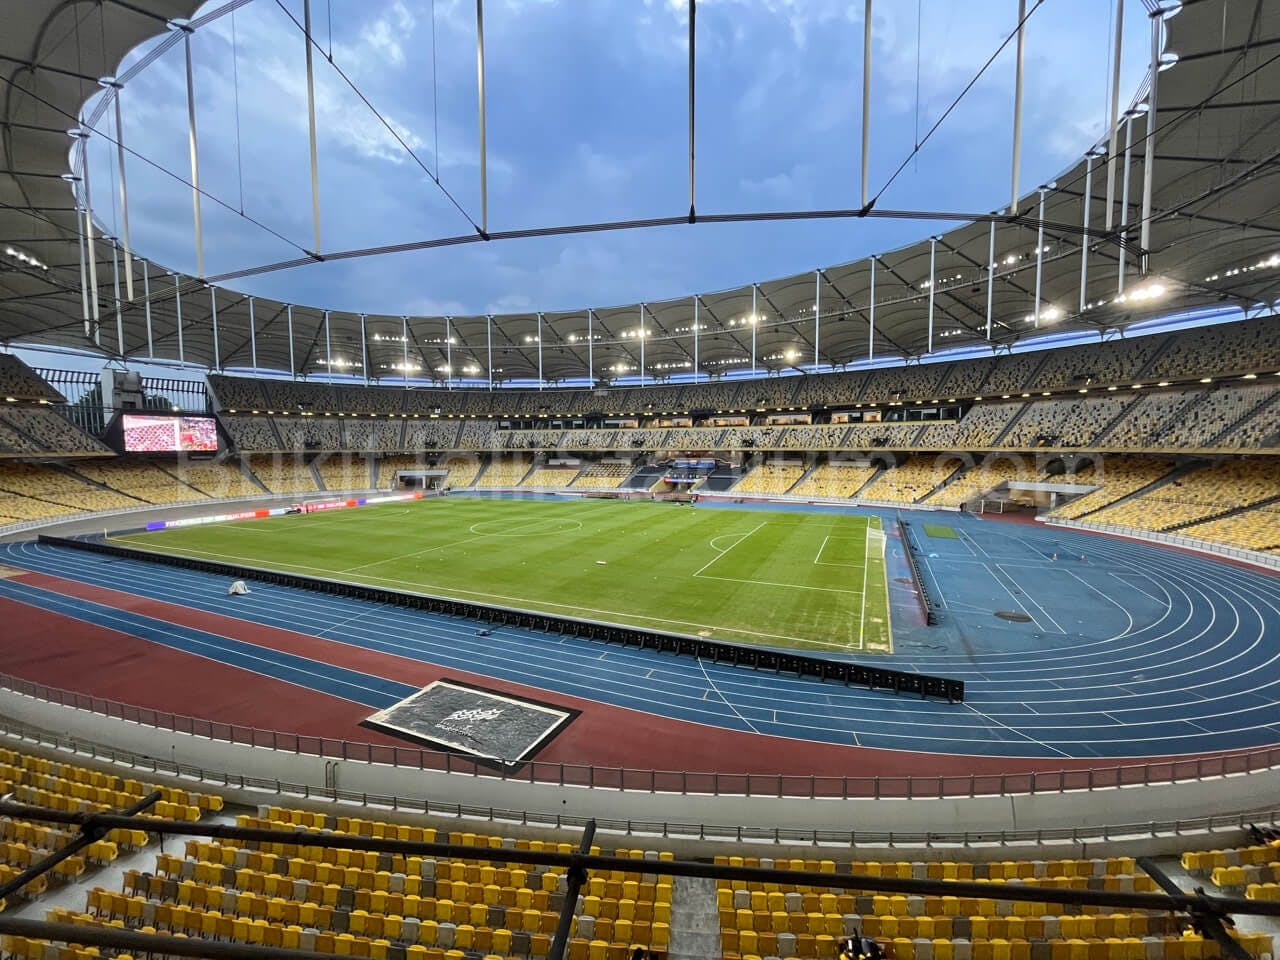 0.5x View of Bukit Jalil field from section 209 of Stadium Bukit Jalil.